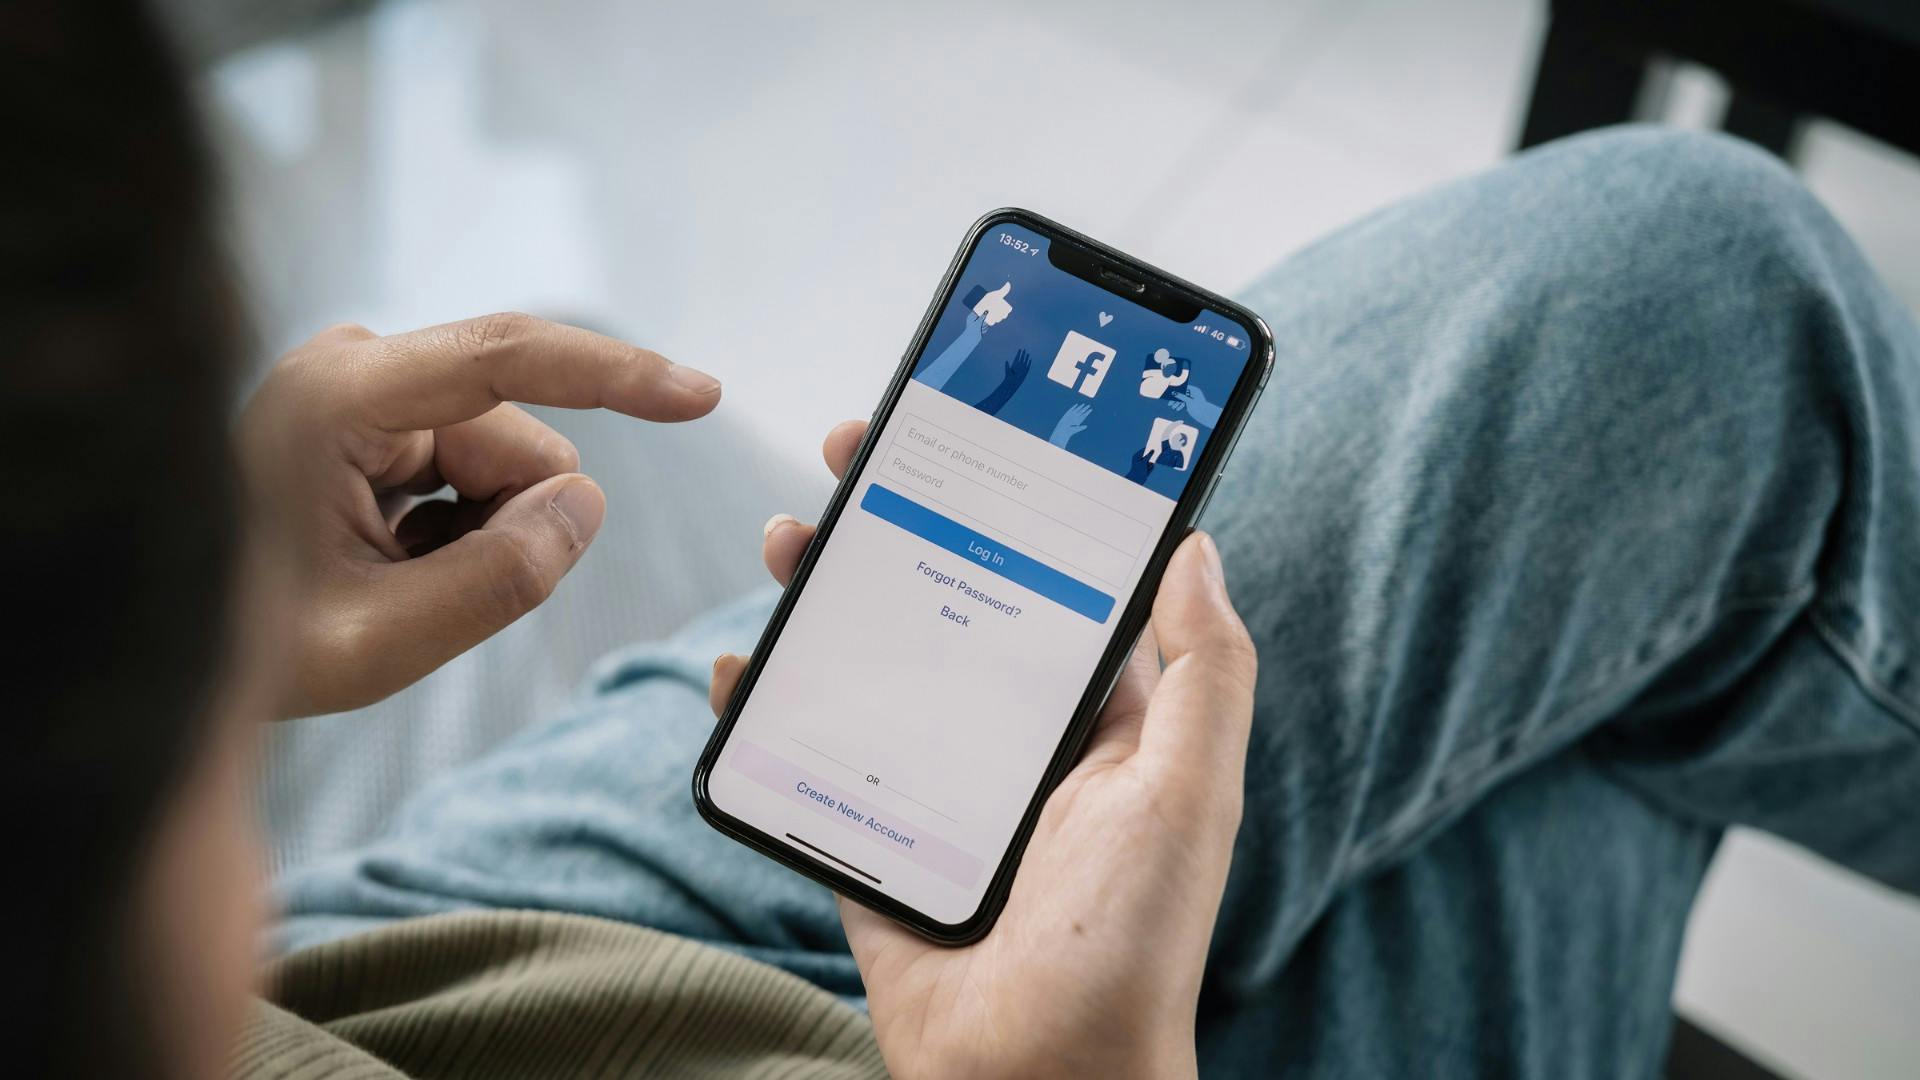 Man sitting down while holding a phone with Facebook login page on phone screen